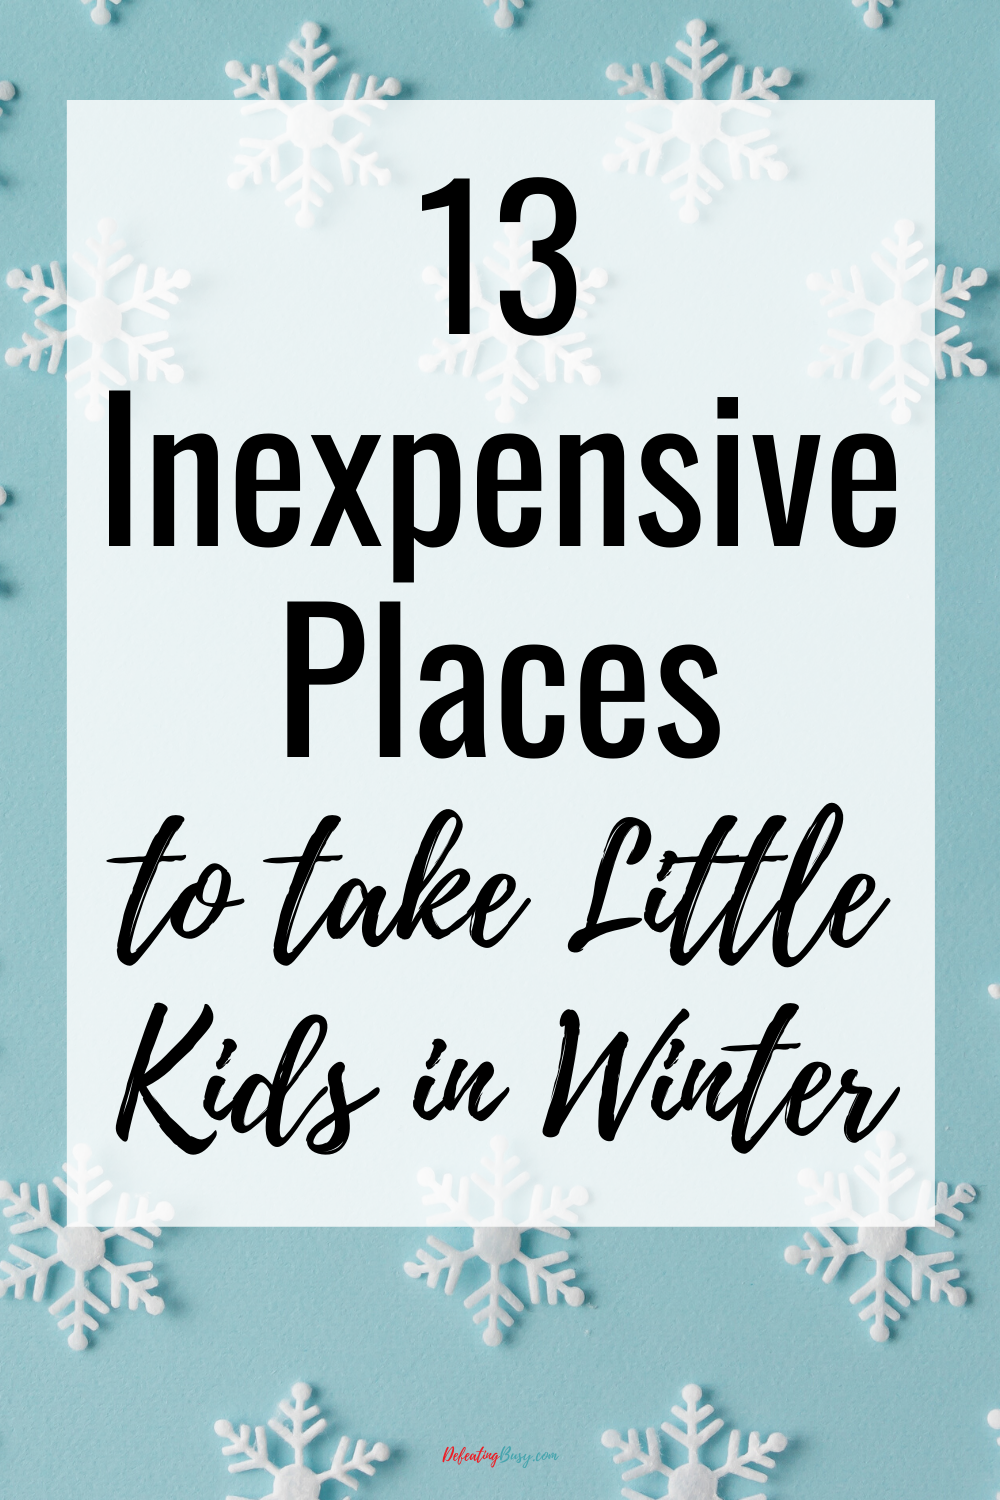 13 Inexpensive Places to Take Little Kids in Winter - Defeating Busy